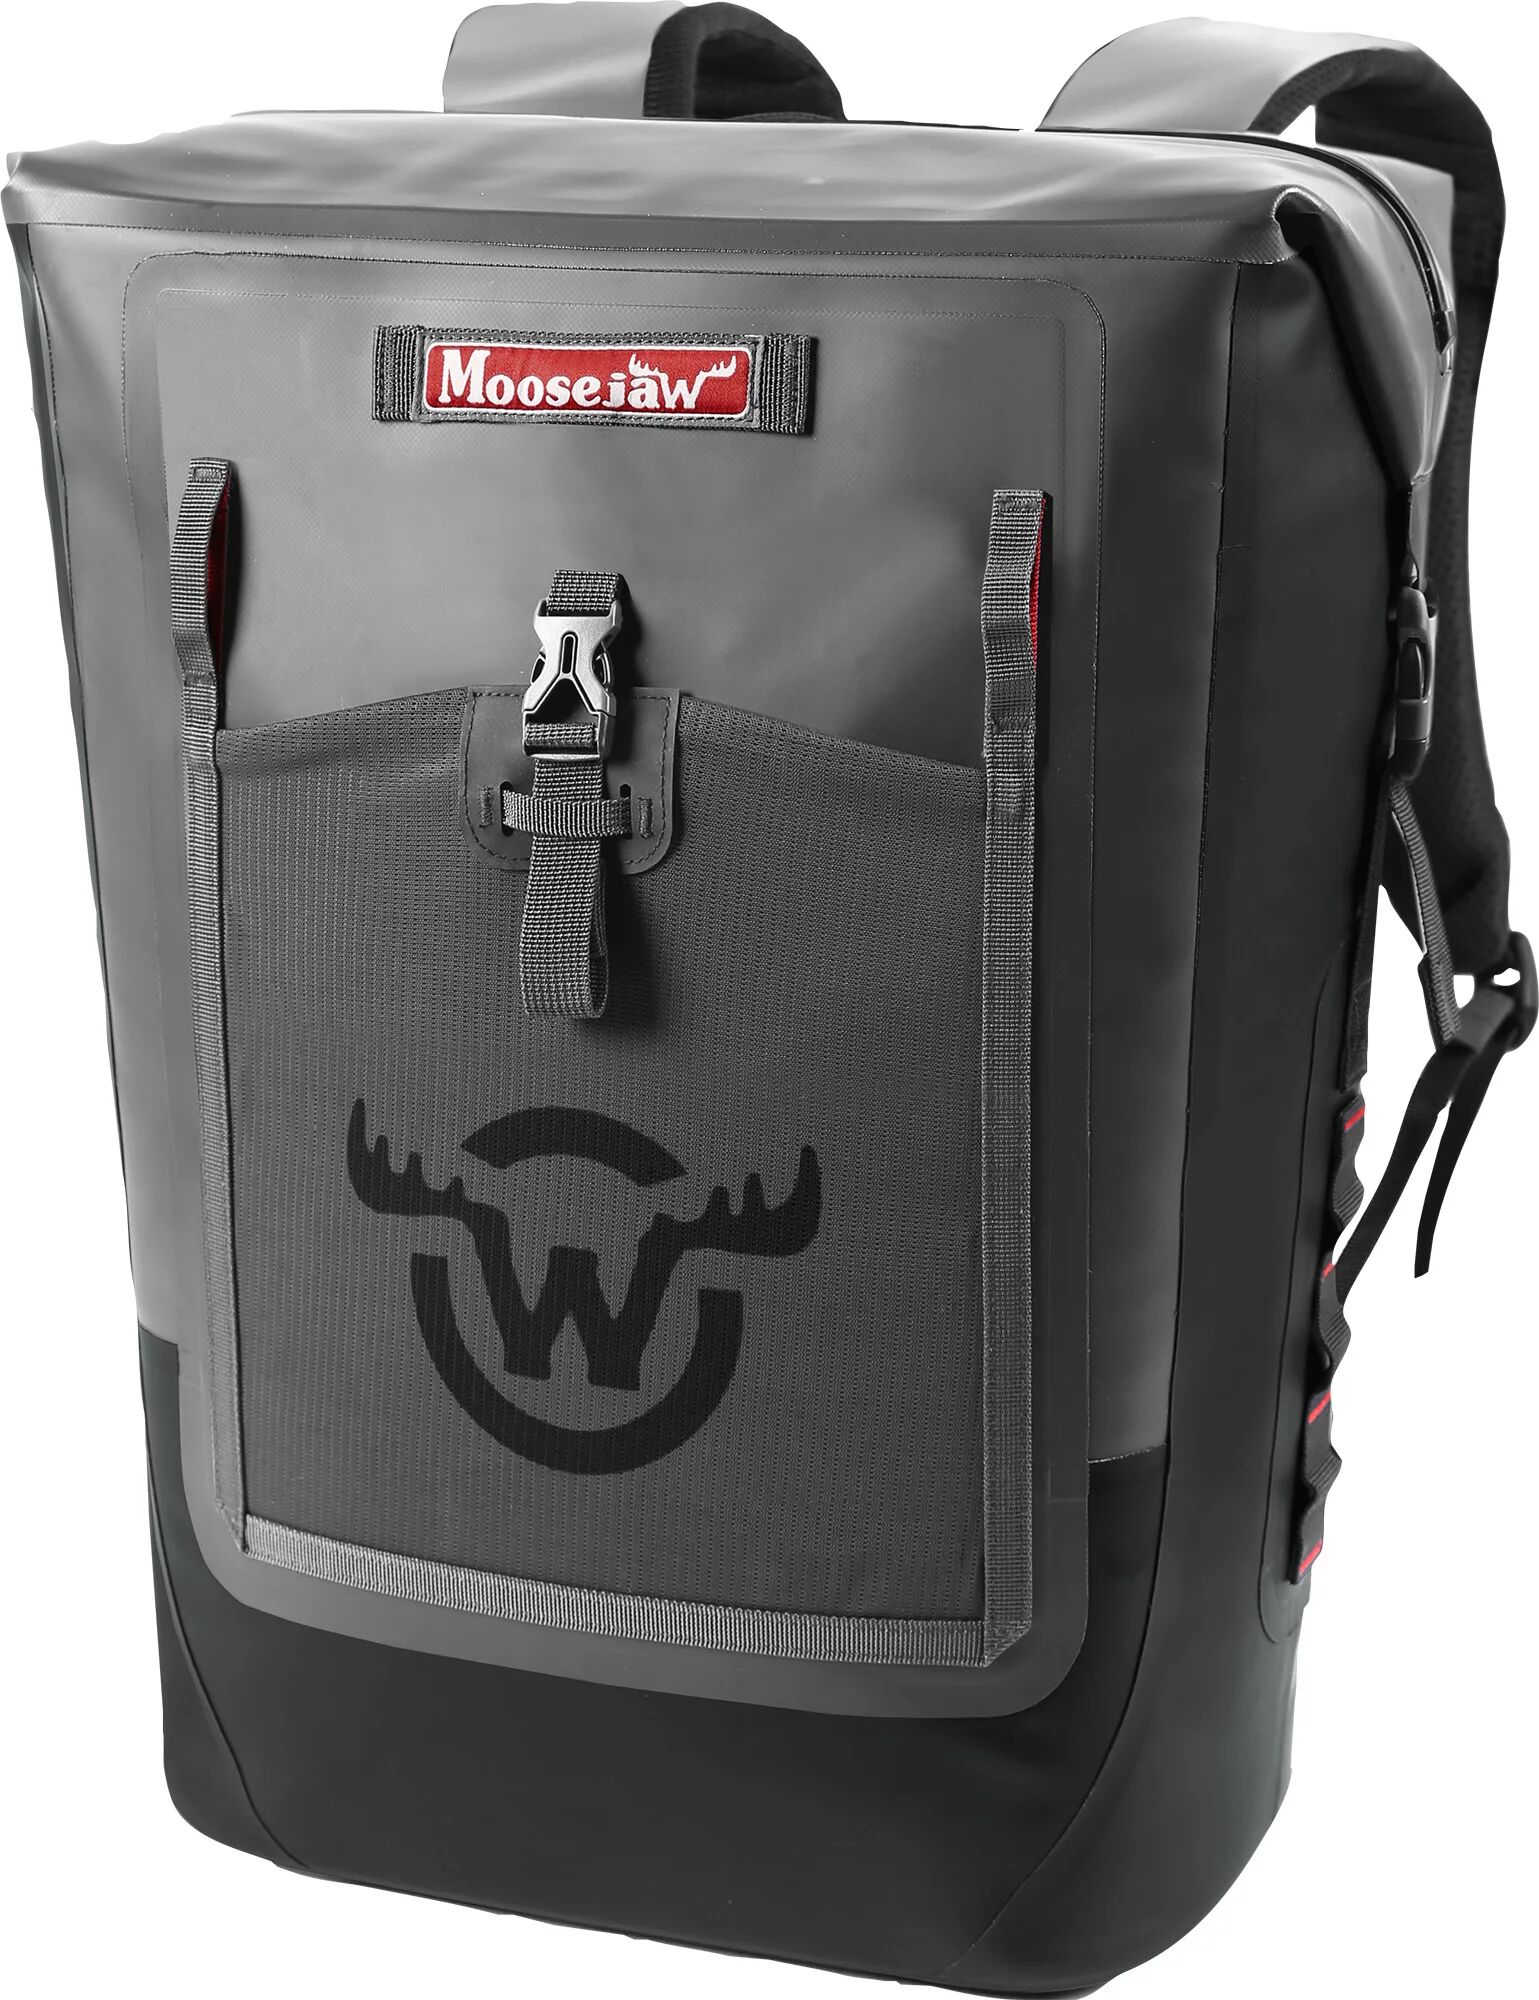 Moosejaw Chilladilla 24 Can Soft-Sided Backpack Cooler, Gray